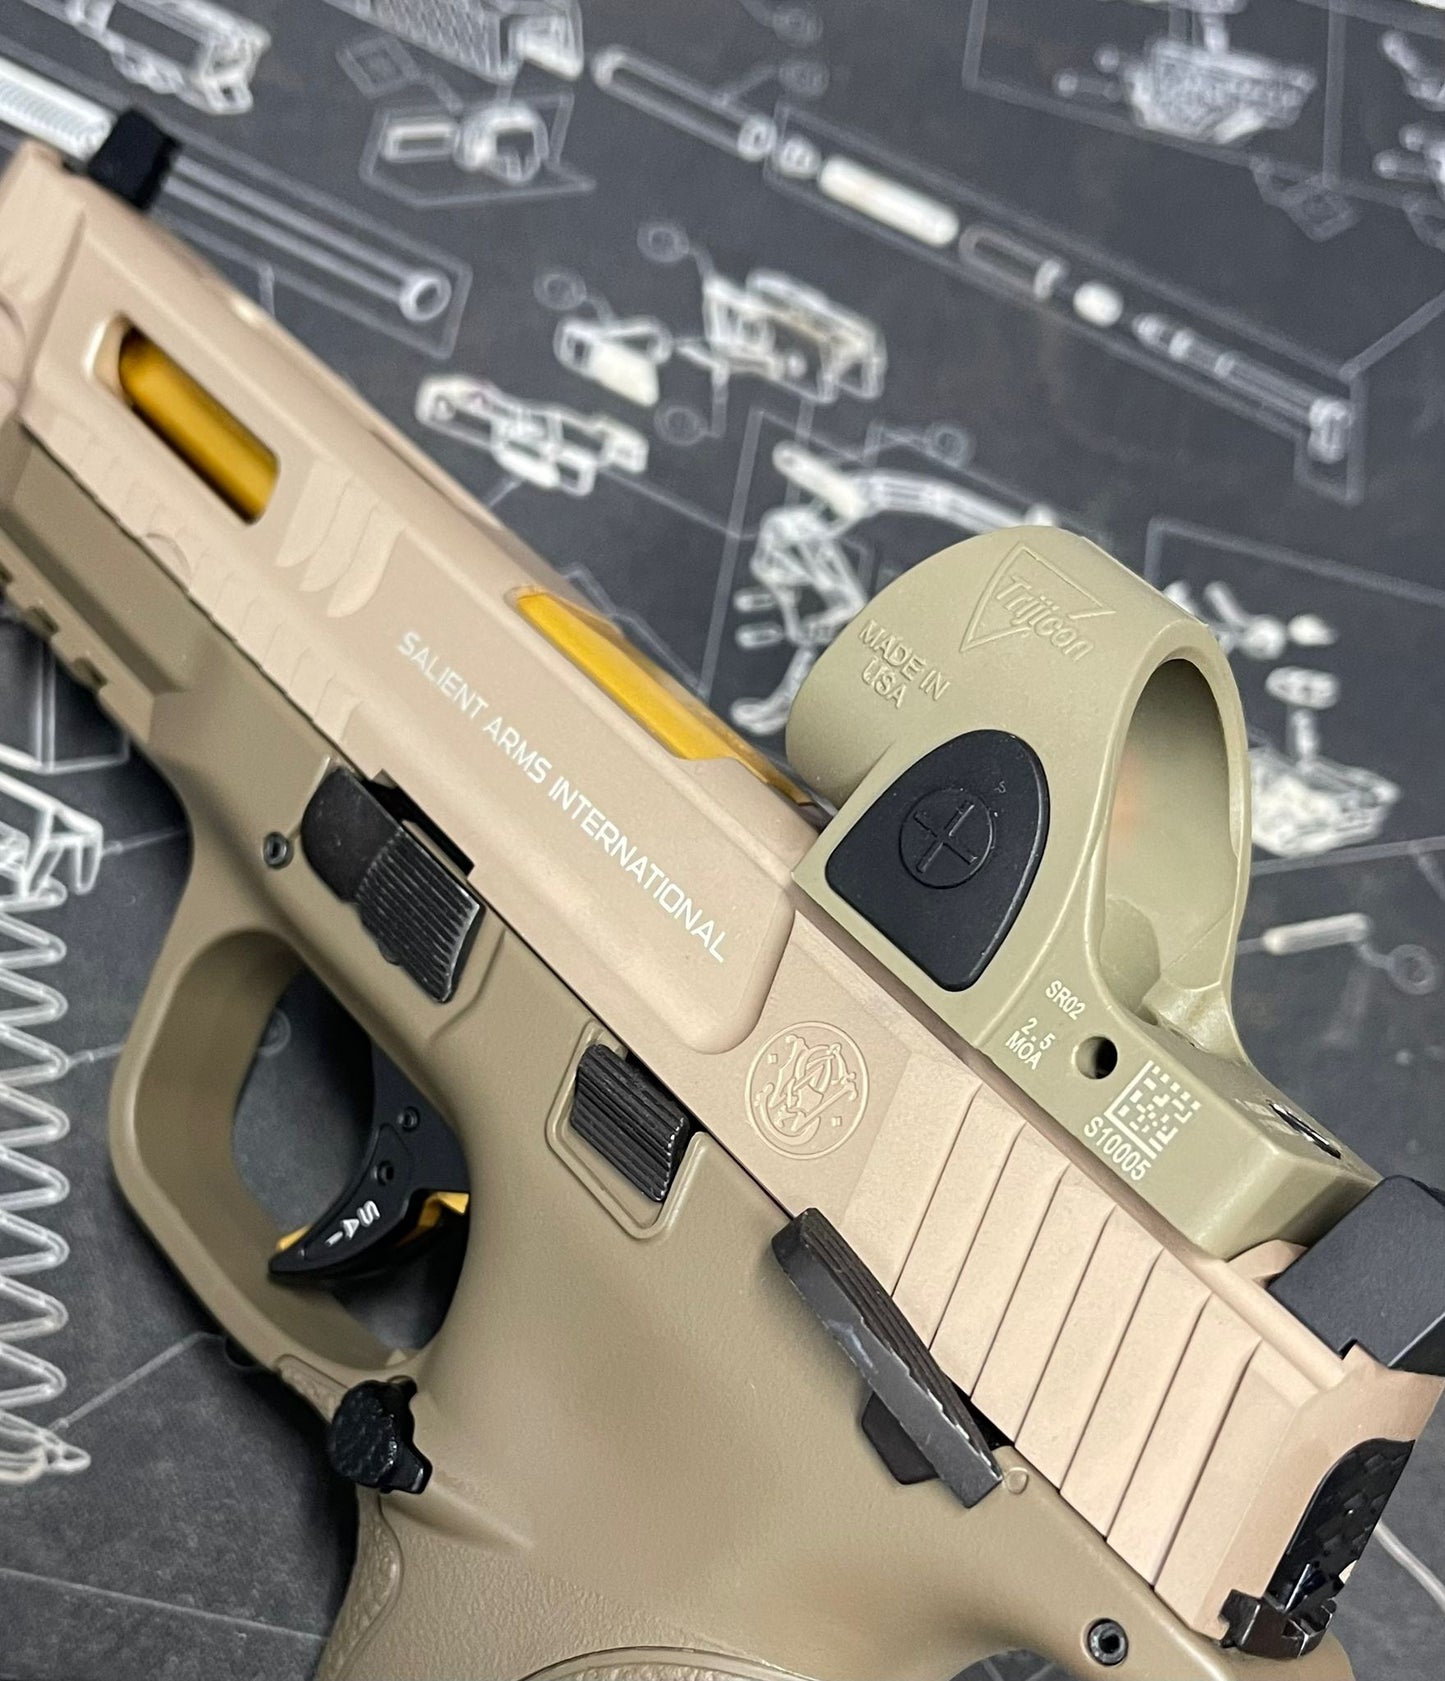 Boomarms Custom - S-style M&P9 Airsoft GBB - Tan